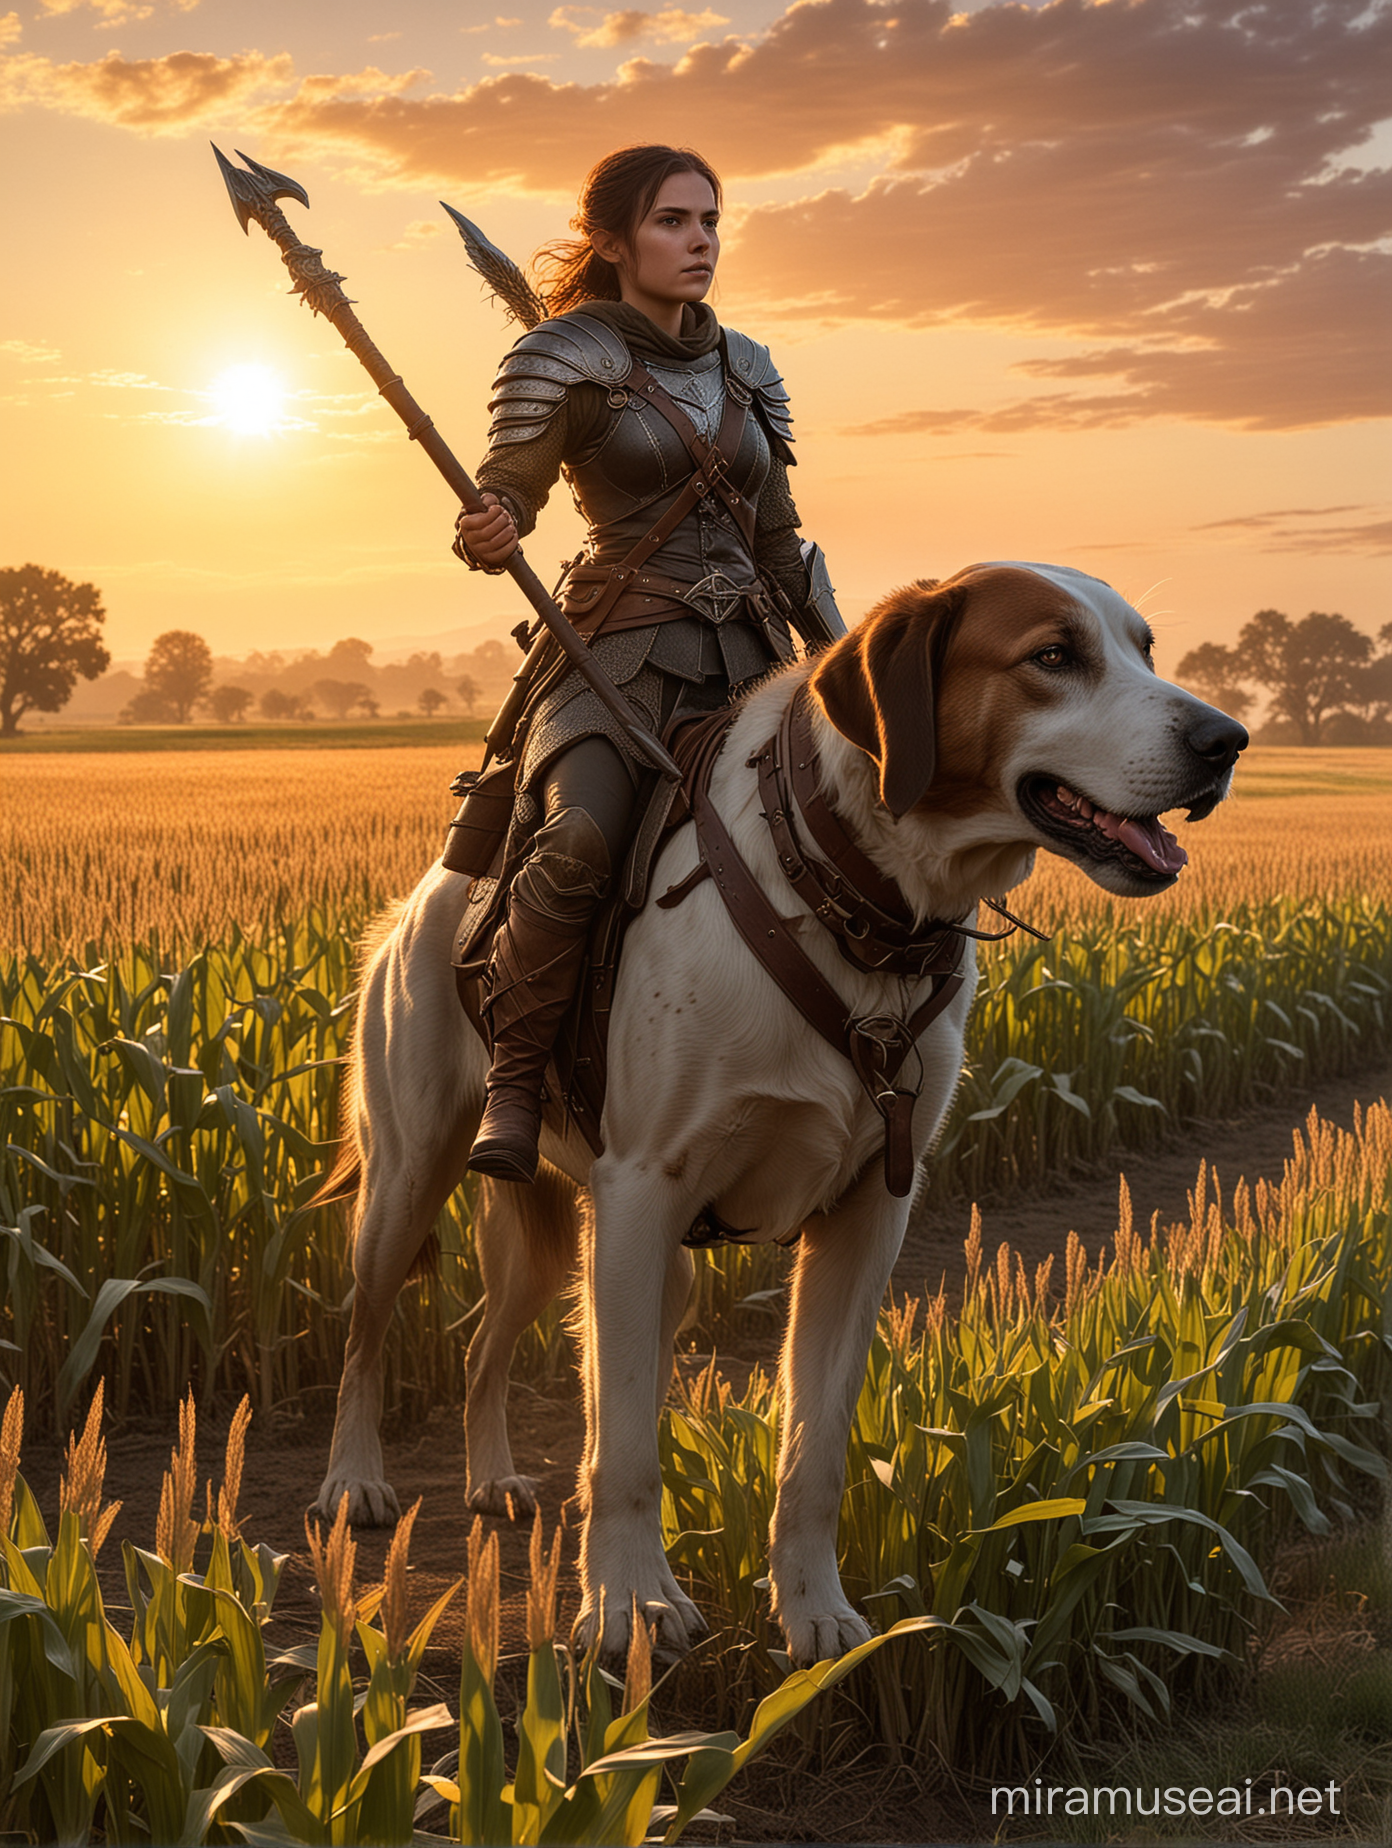 Halfling Outrider with Spear on Hound in Sunset Cornfield